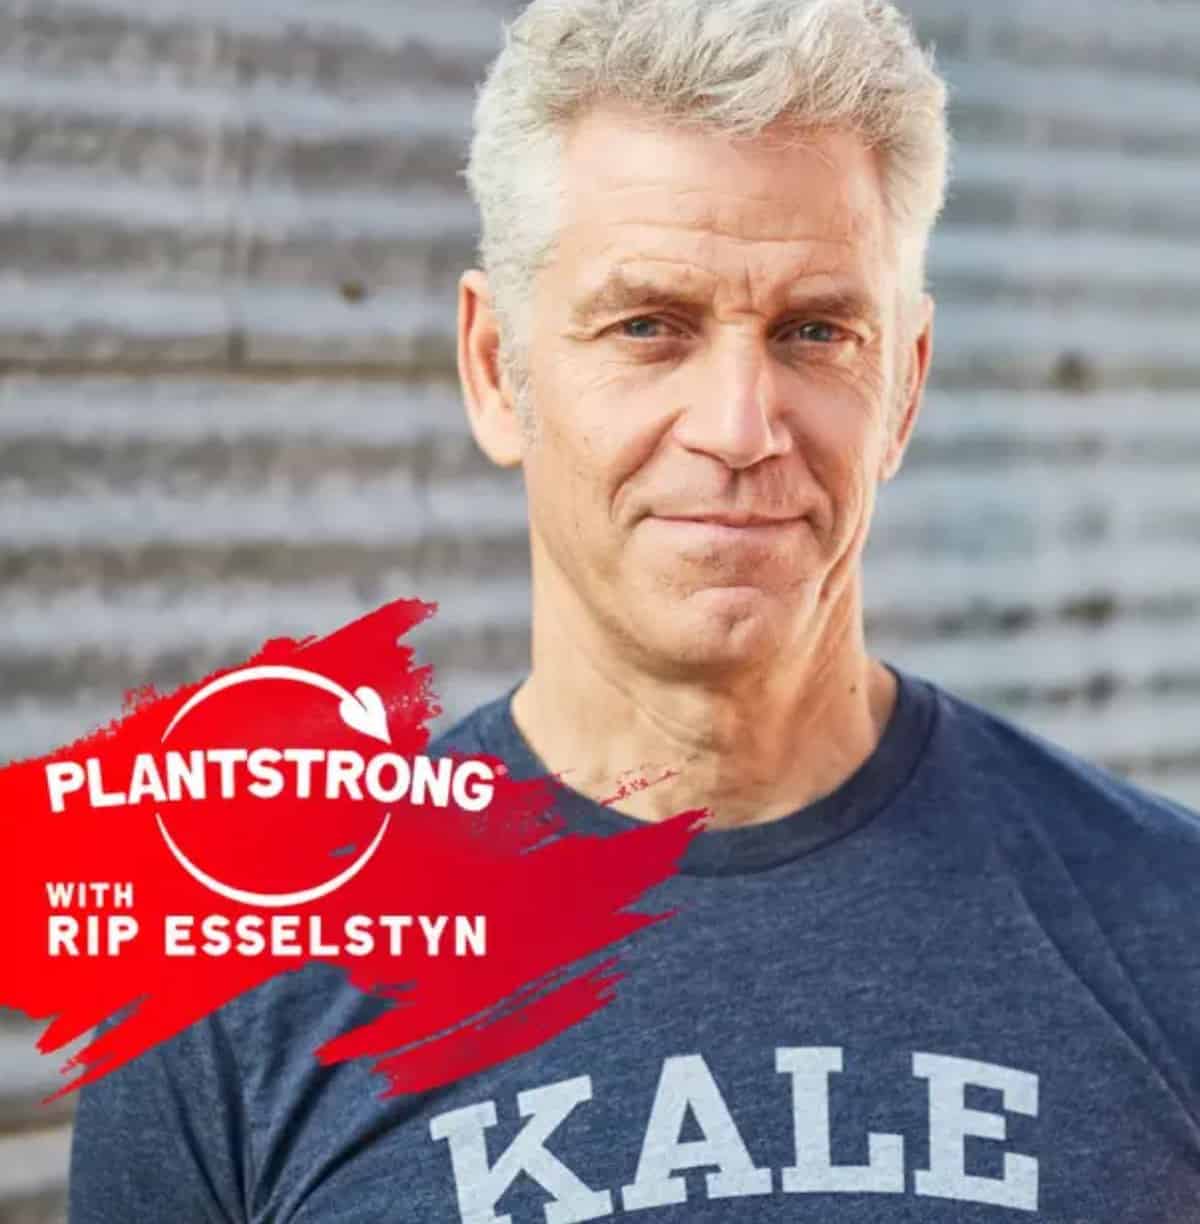 Plantstrong podcast with Rip Esselstyn cover art.